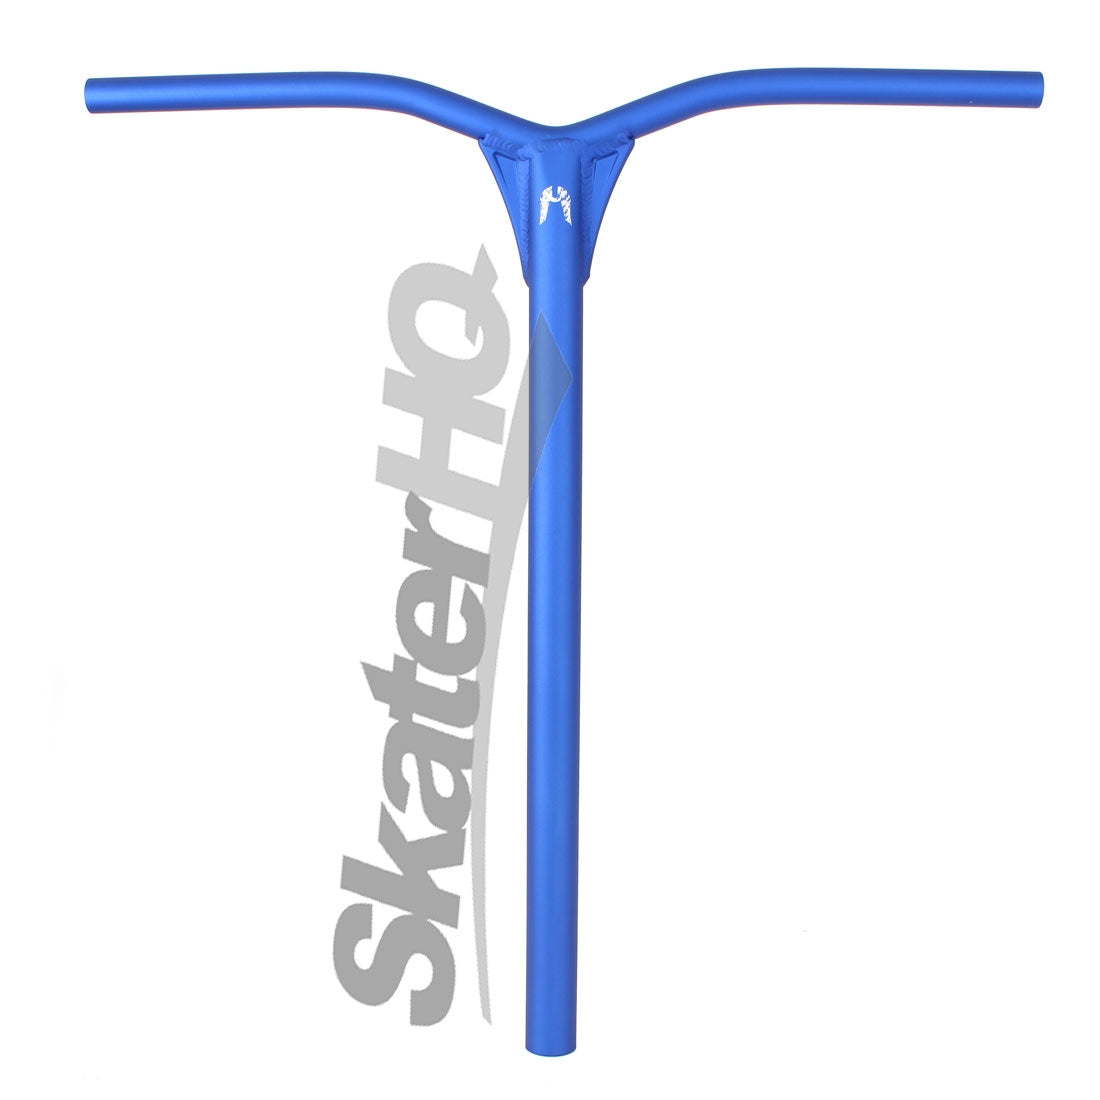 Ethic Dryade 620mm Bar - Blue Scooter Bars